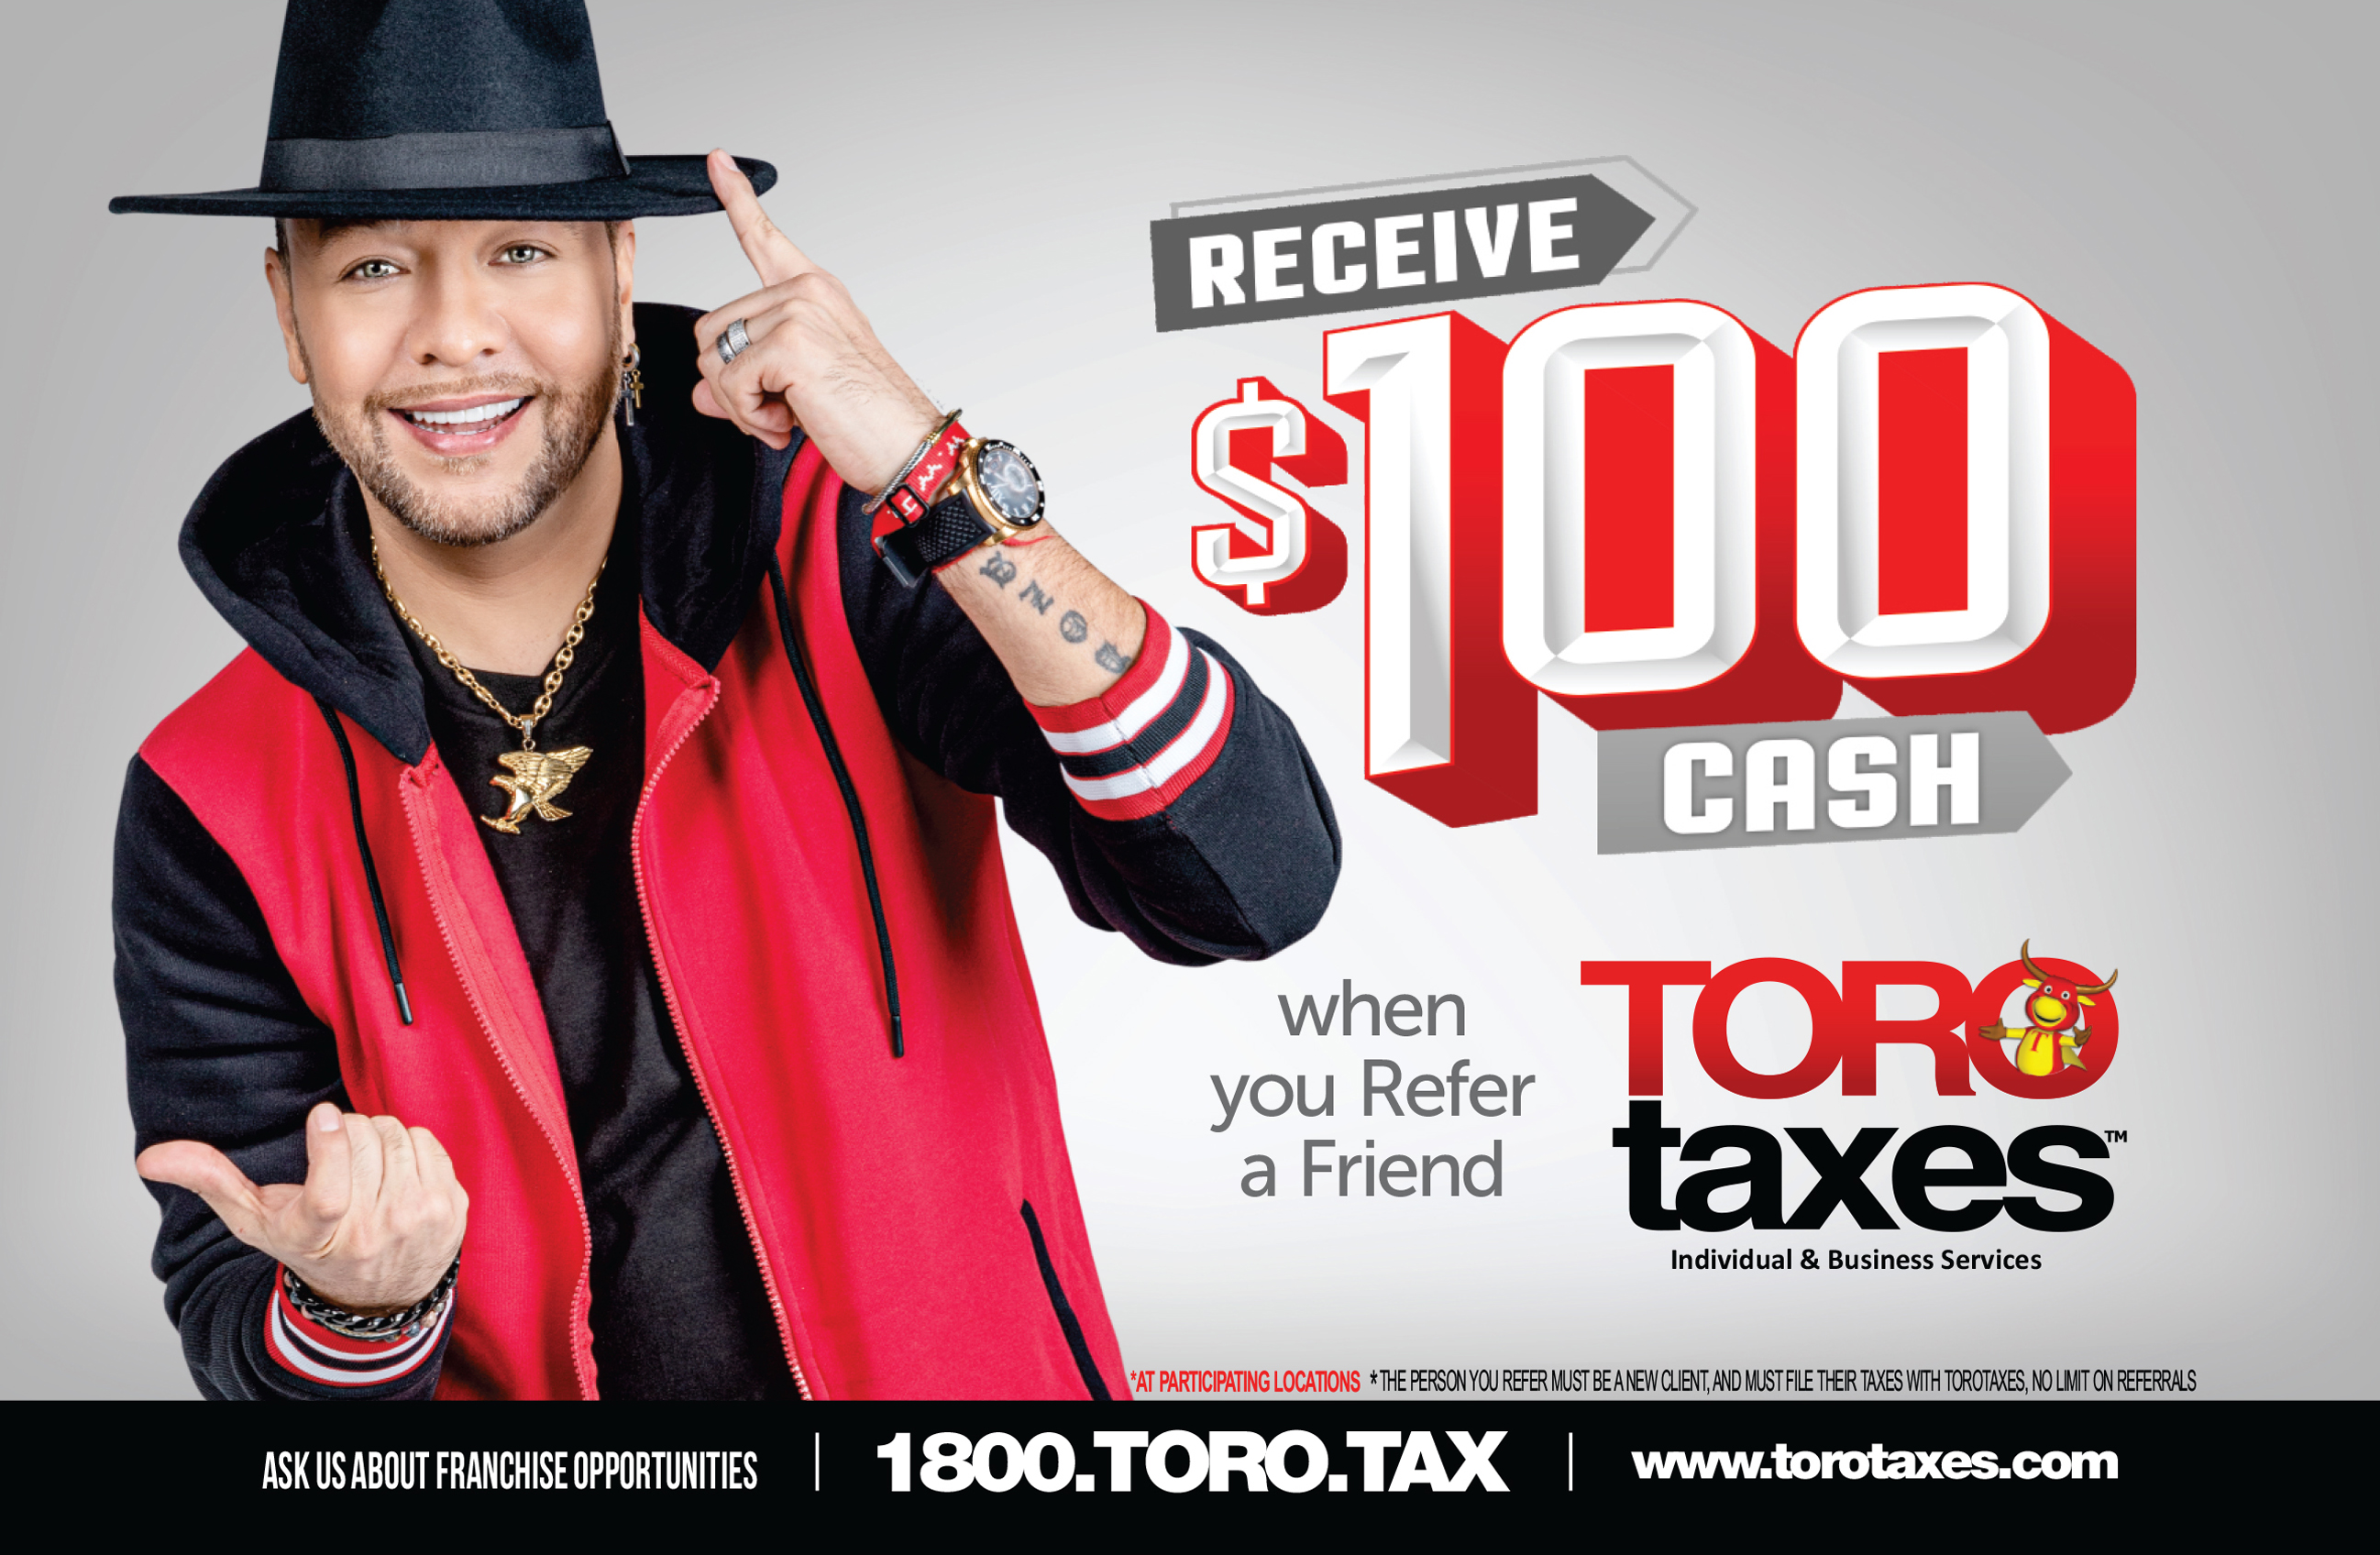 Toro Taxes refer a friend for $100